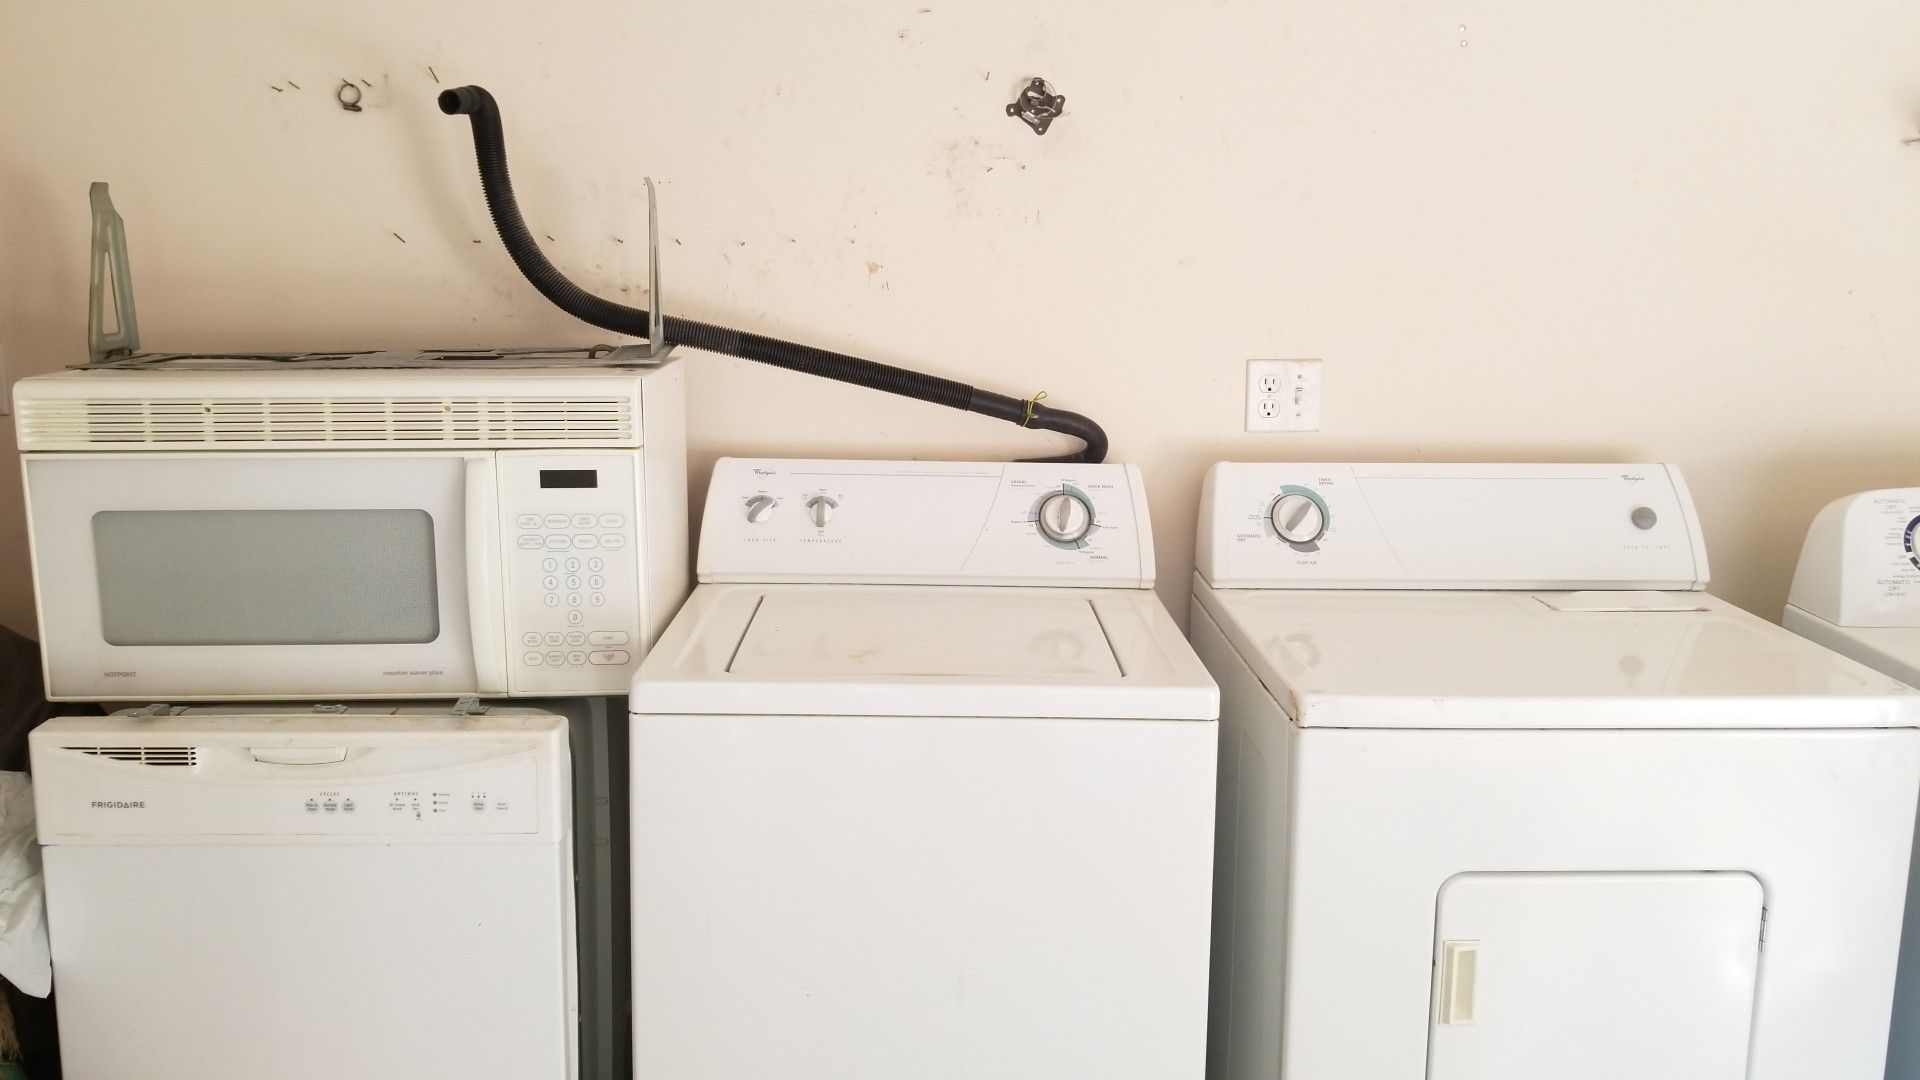 Entire items going for $110.(.Microwave and dishwasher,and dryer has been Sold)